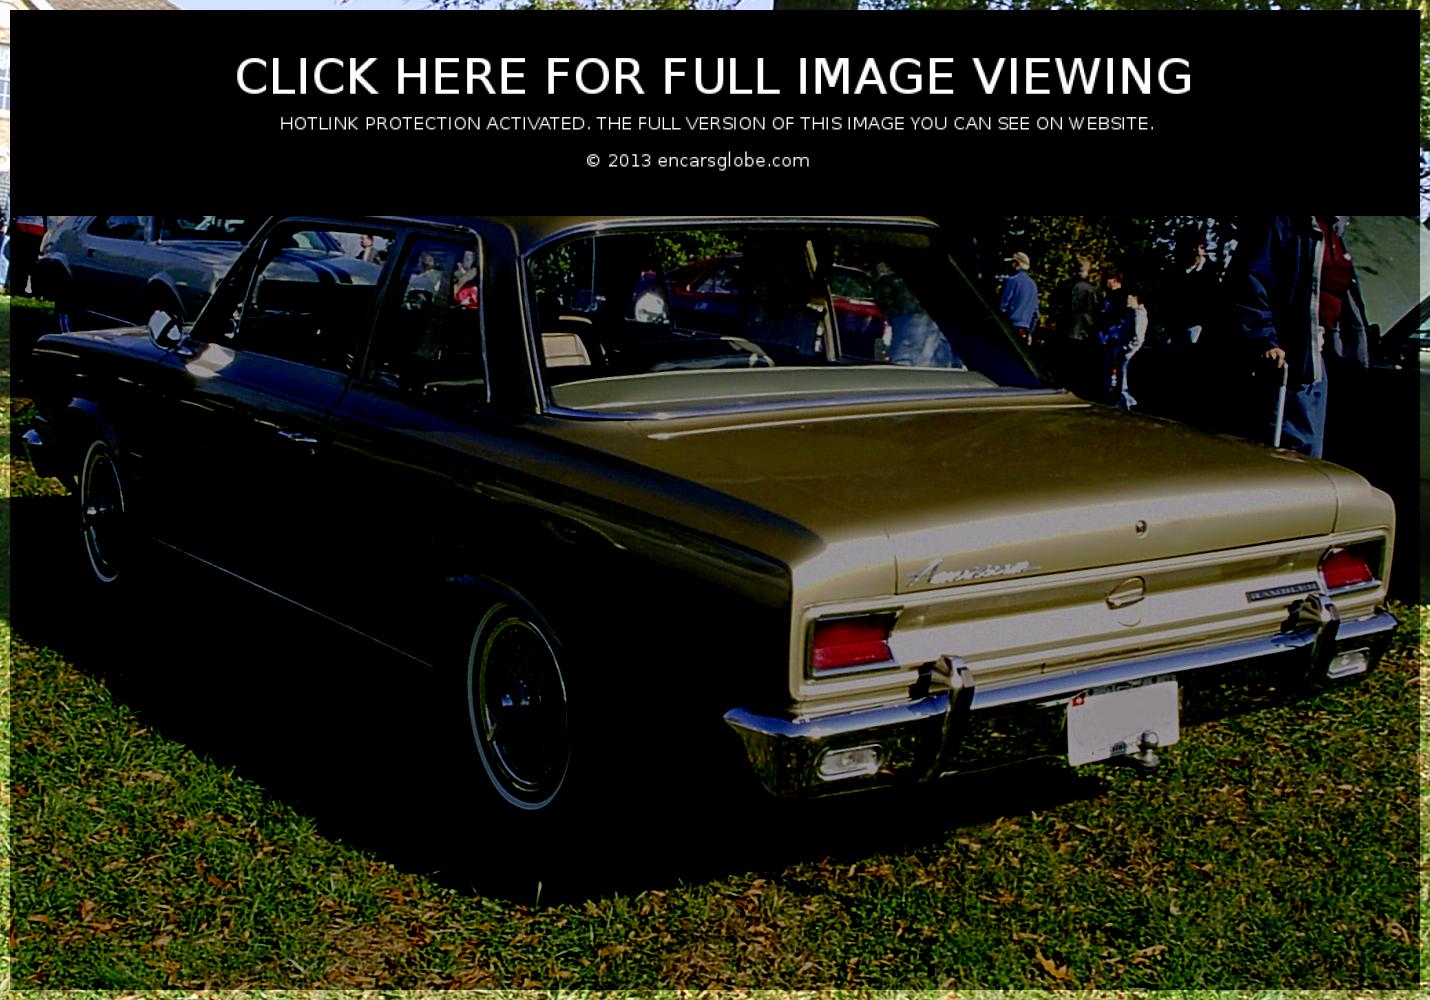 Rambler Classic 550 Photo Gallery: Photo #01 out of 12, Image Size ...